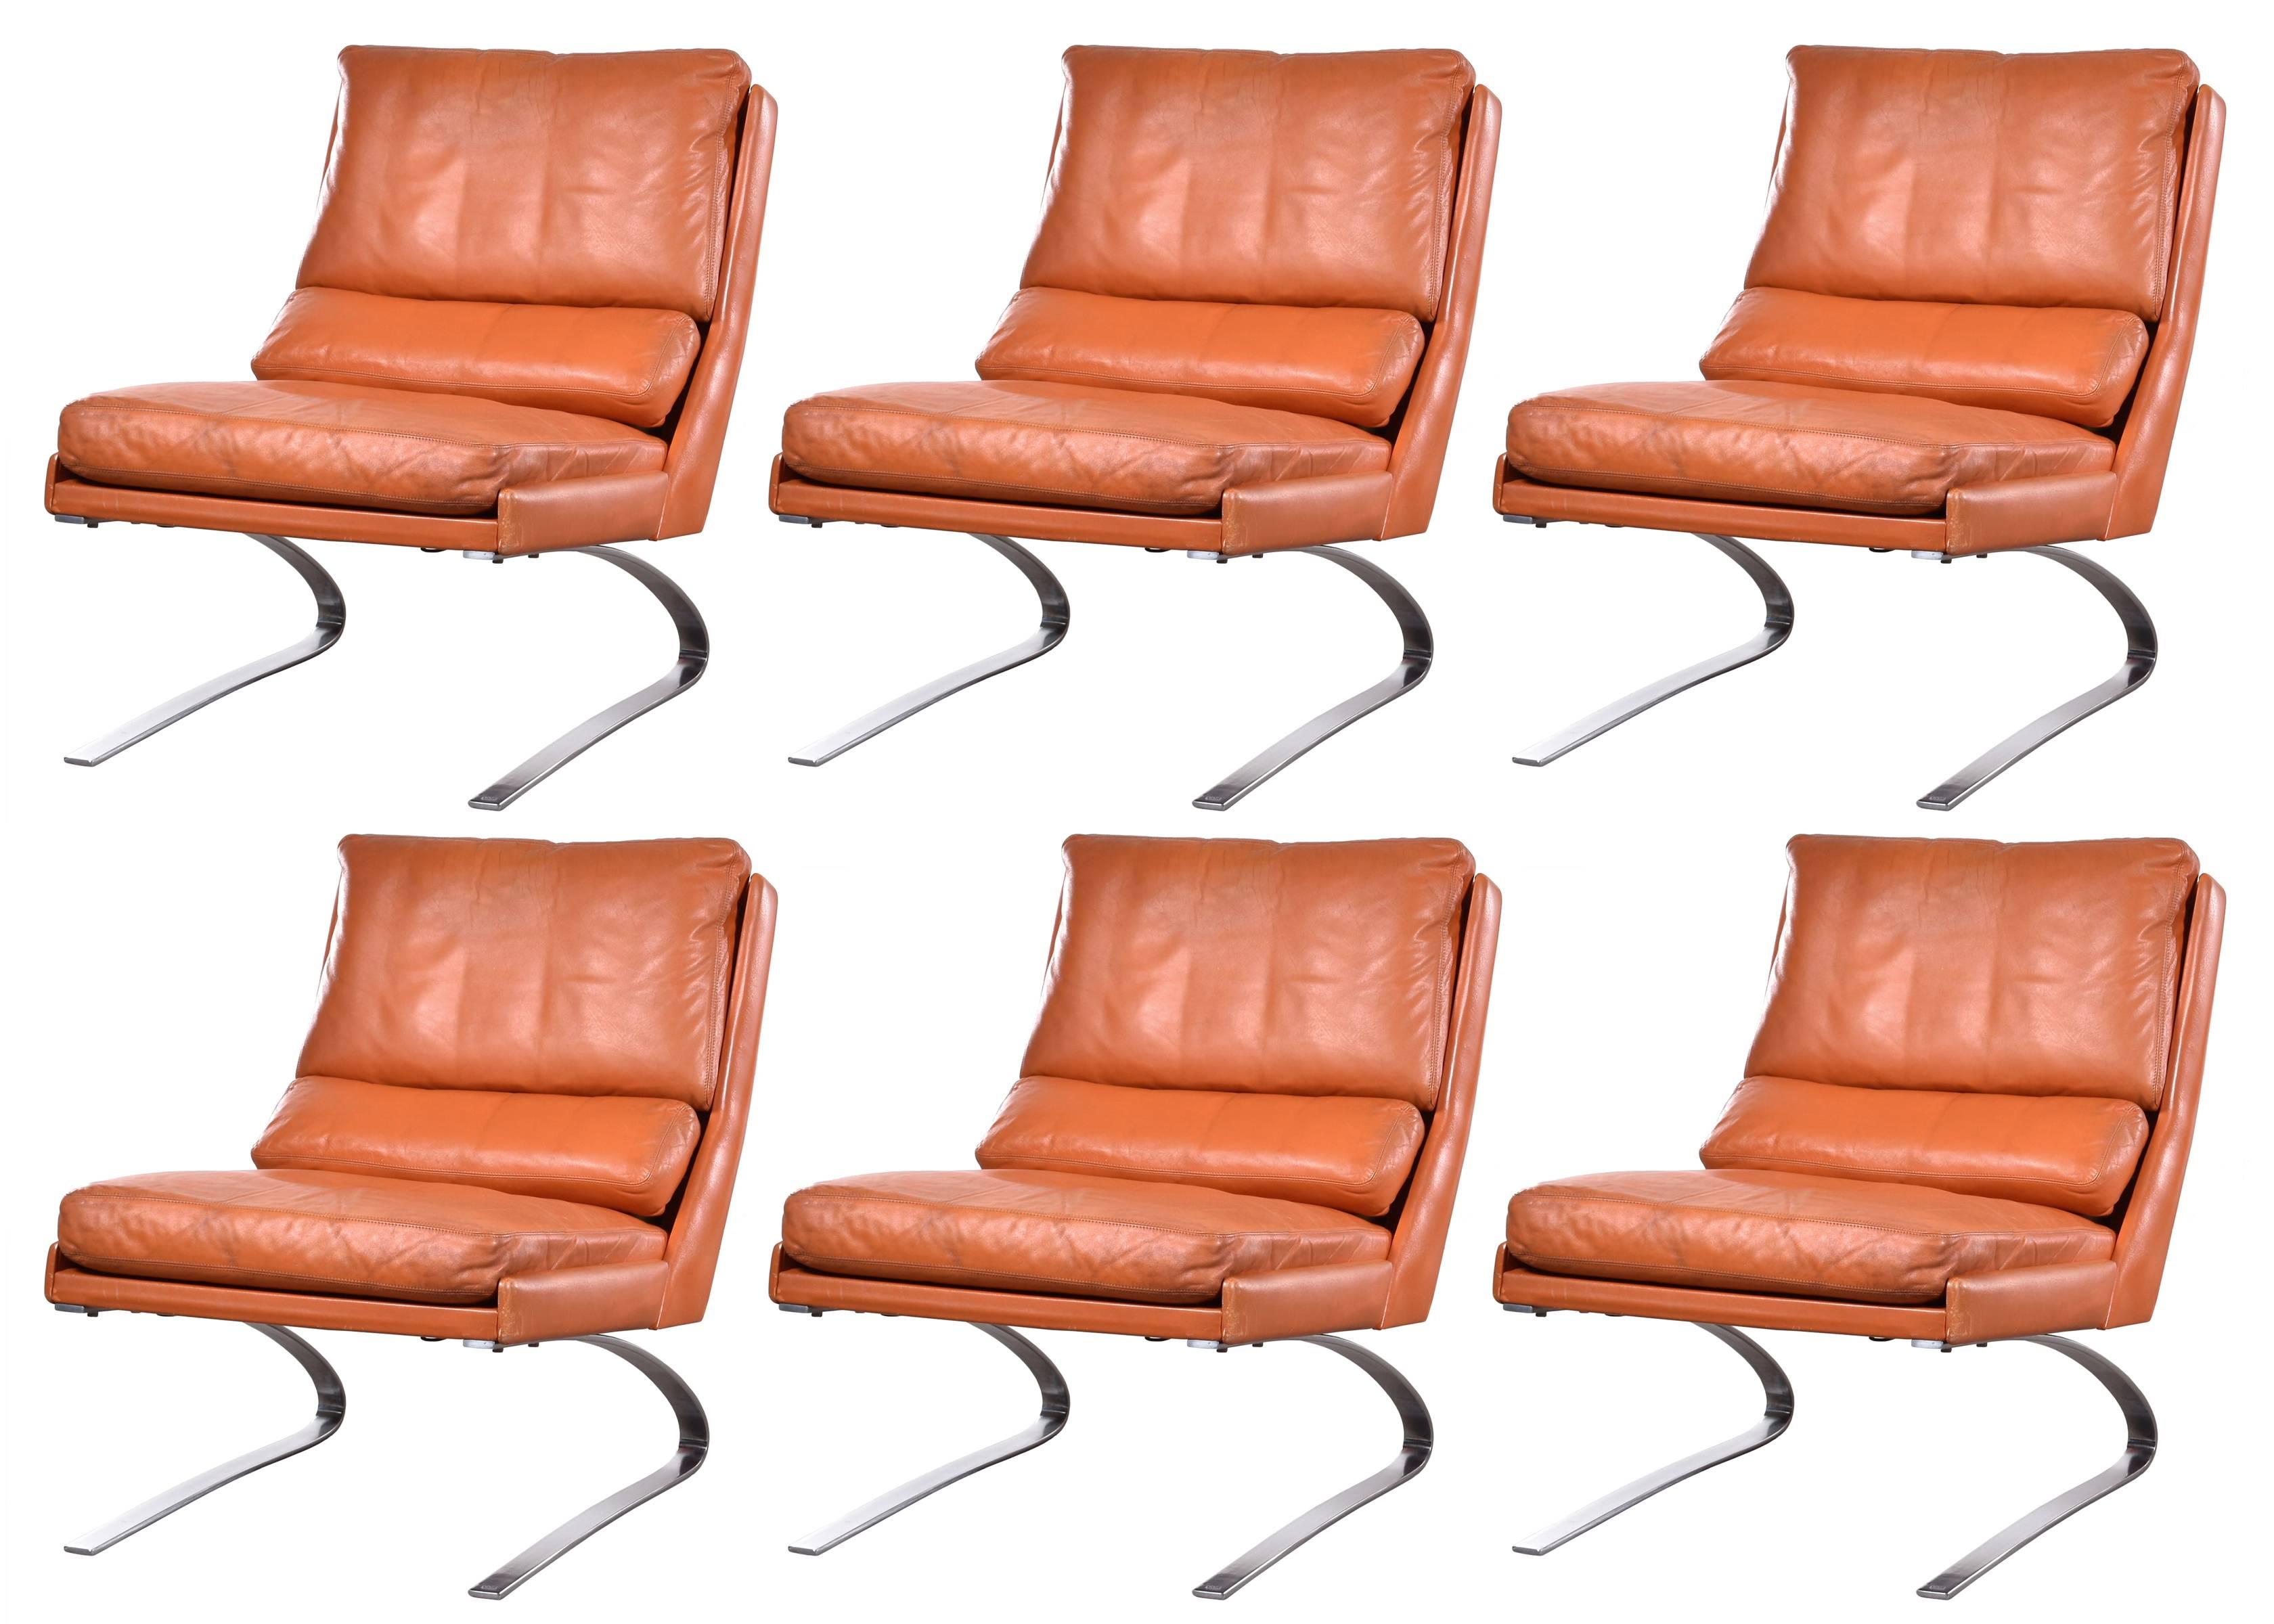 Extremely comfortable lounge chairs due 'spring' frame and down filled leather cushions. The original orange or cognac leather is in good condition with light traces of use and nice patina. Six chairs are available.
Feel free to contact us if you